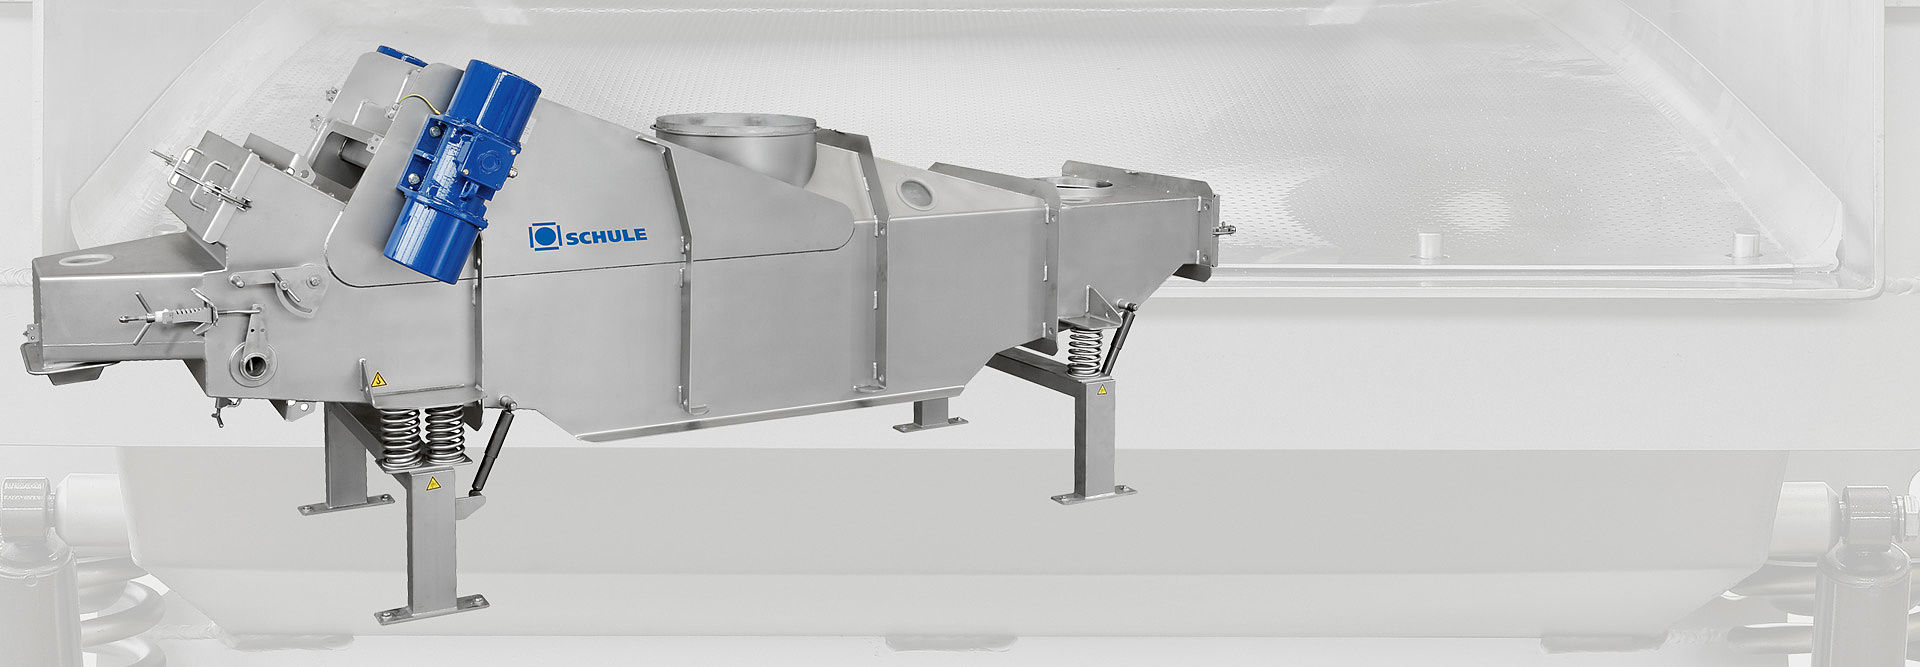 Picture of a SCHULE fluidised bed cooler